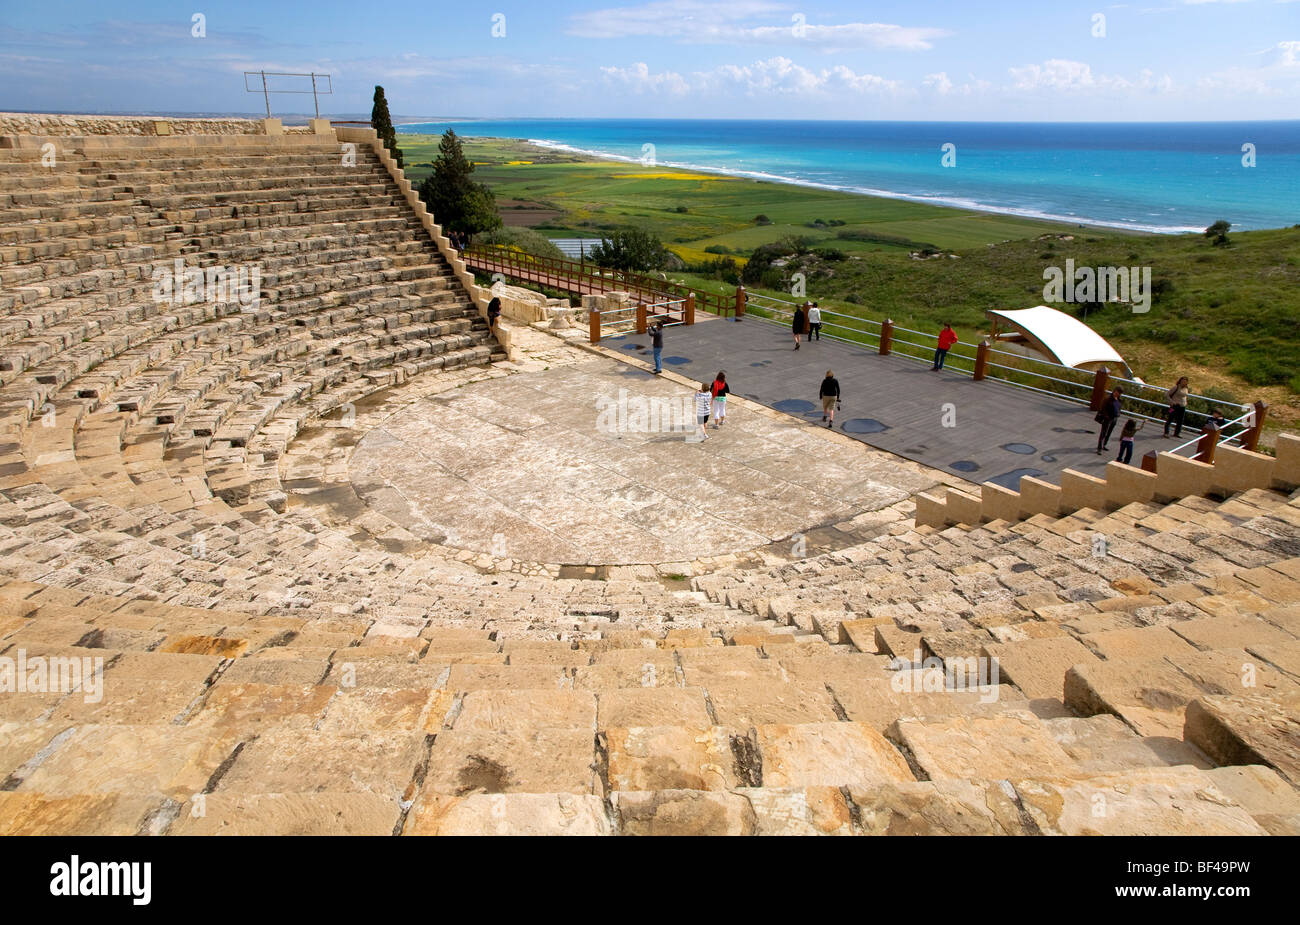 The archaeological site of Kourion, ancient theater 2th. century AD, UNESCO World Heritage Site, Paphos, Cyprus, Greece, Europe Stock Photo